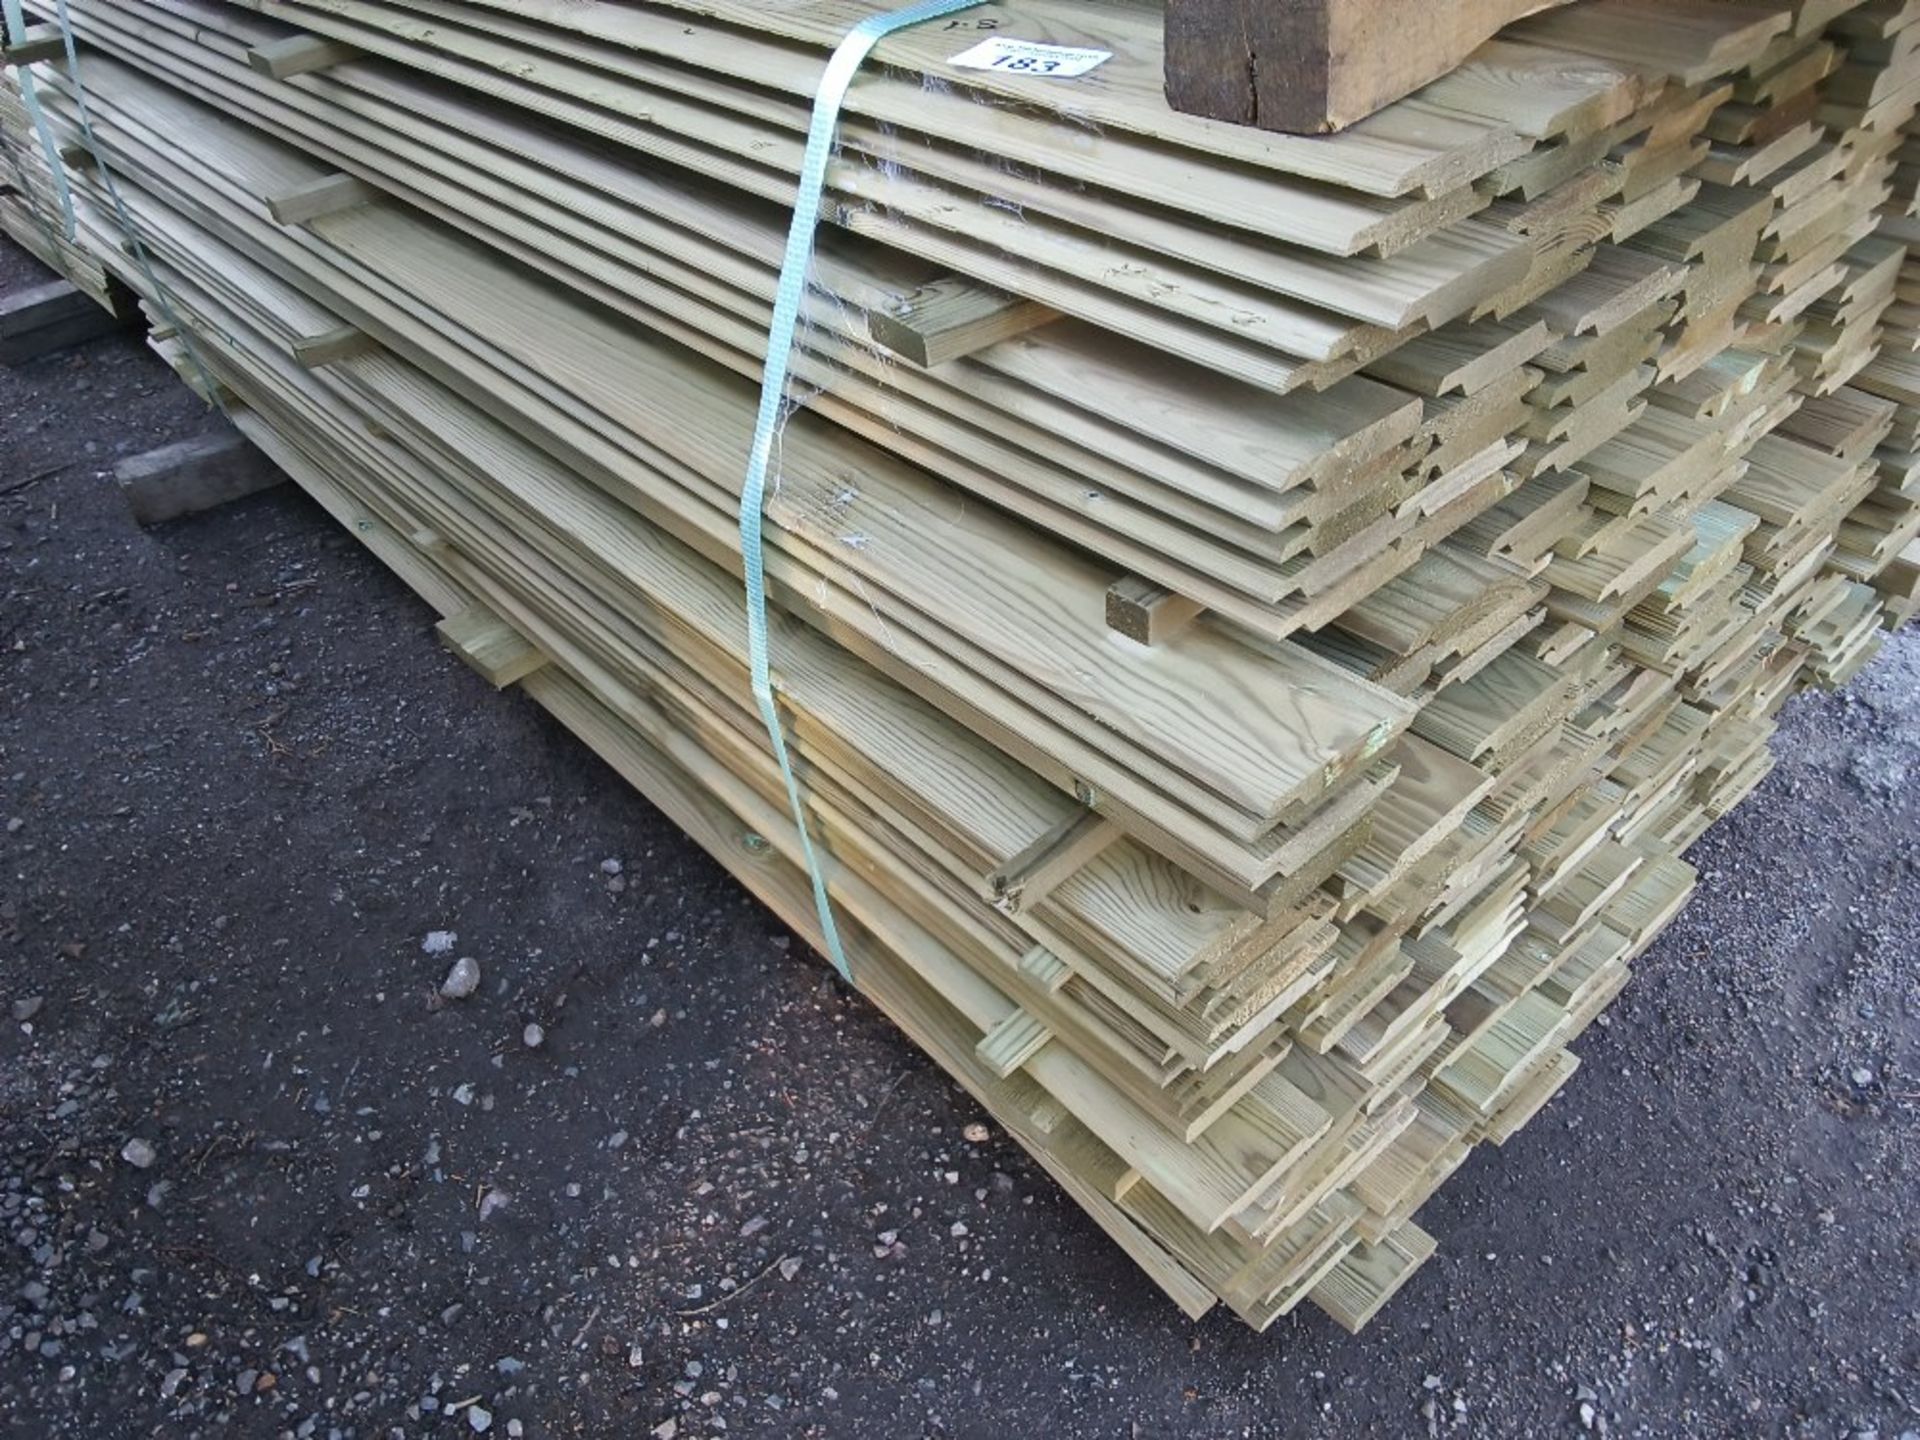 LARGE PACK OF TREATED SHIPLAP CLADDING TIMBER BOARDS: 1.8M LENGTH X 100MM WIDTH APPROX. - Image 2 of 3